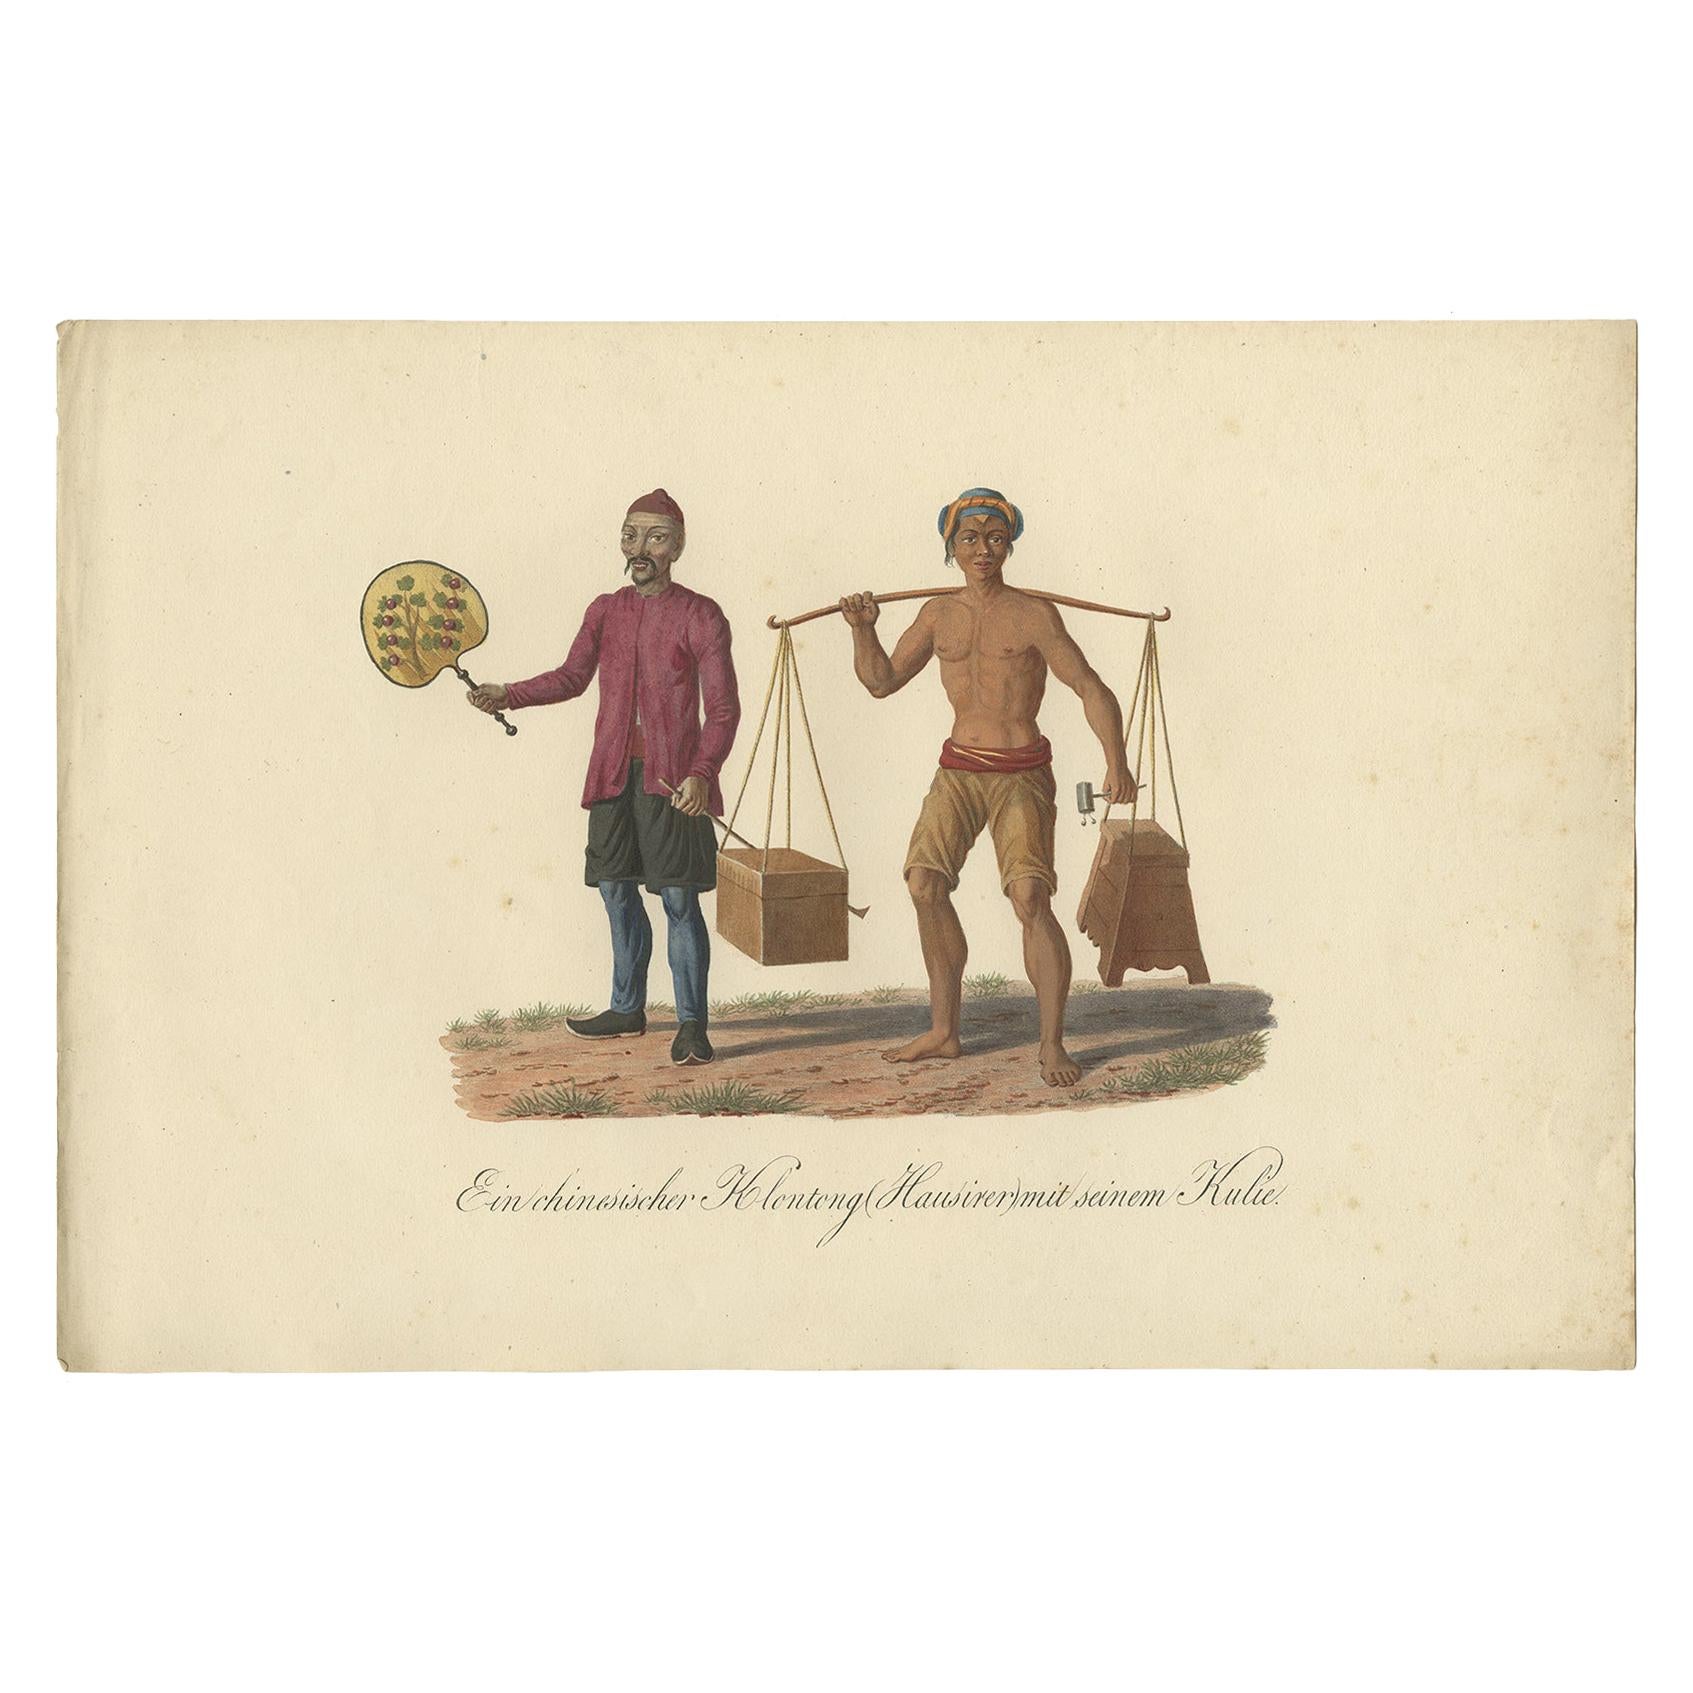 Original Print of a Chinese Peddler and His Day Laborer in Indonesia, ca 1830 For Sale